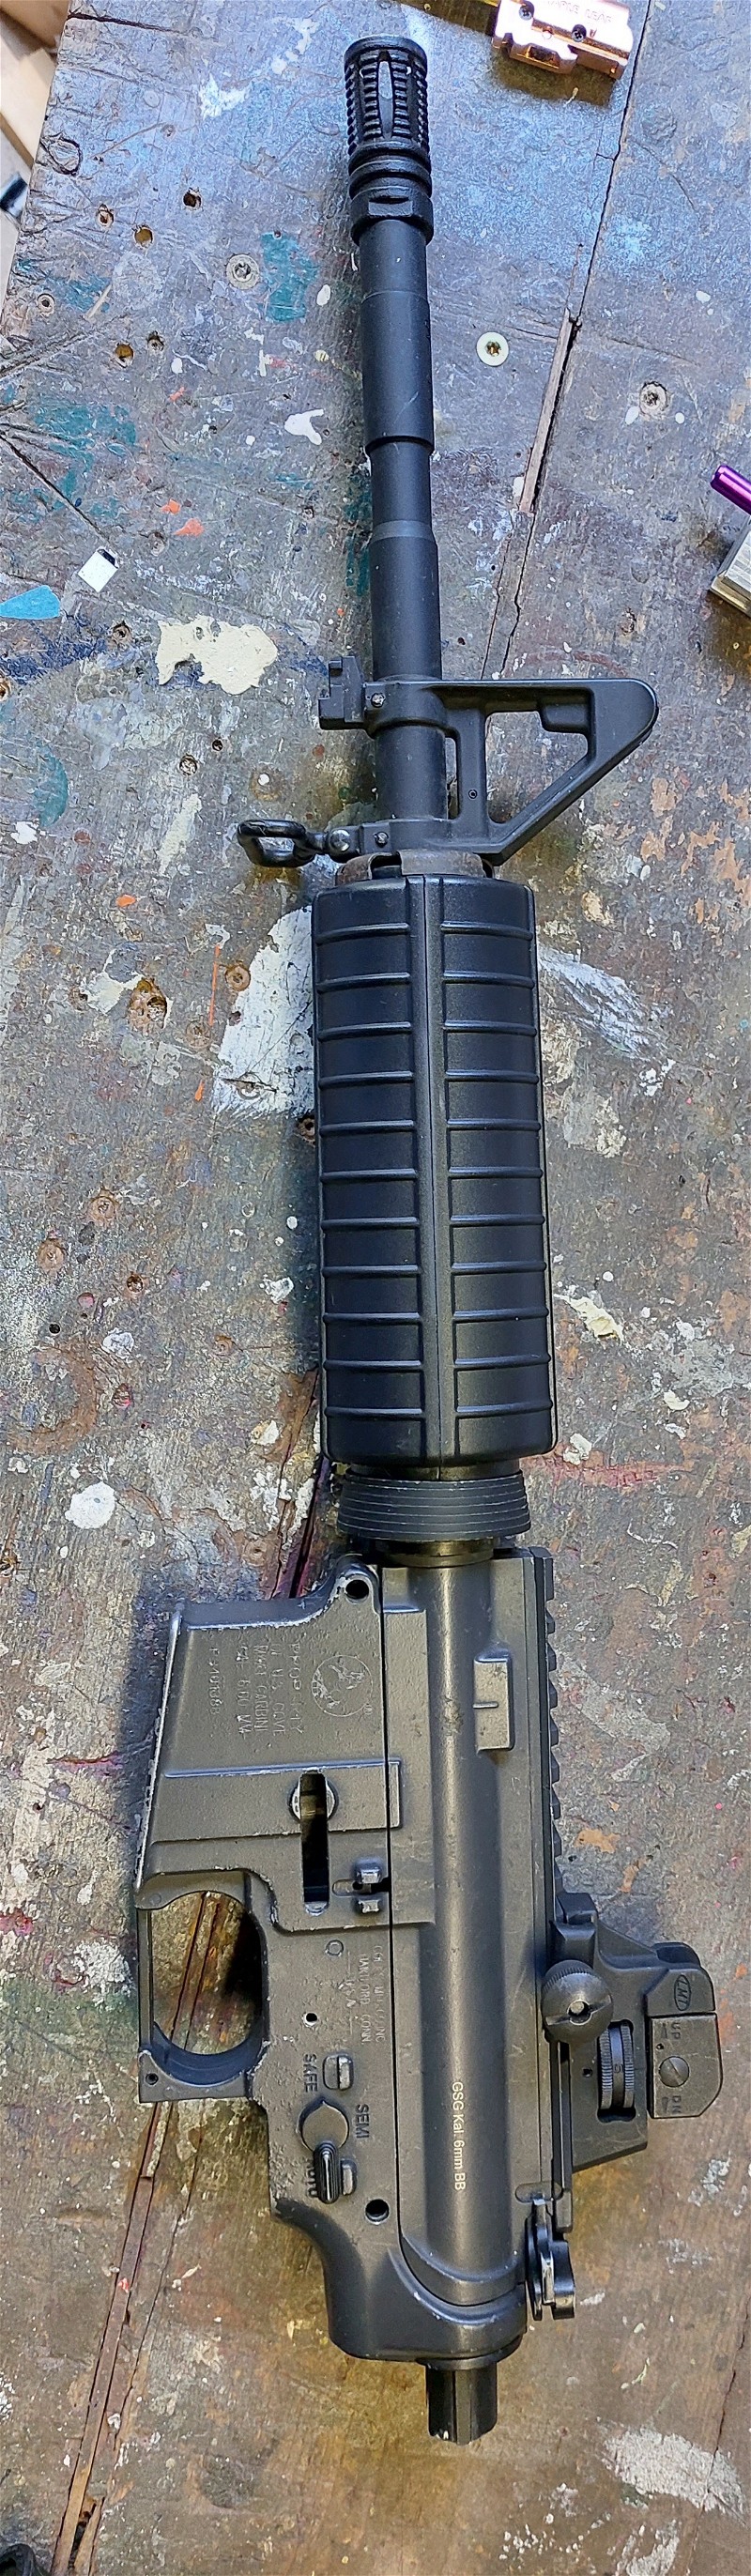 Image 1 for Ics m4 body and barrel